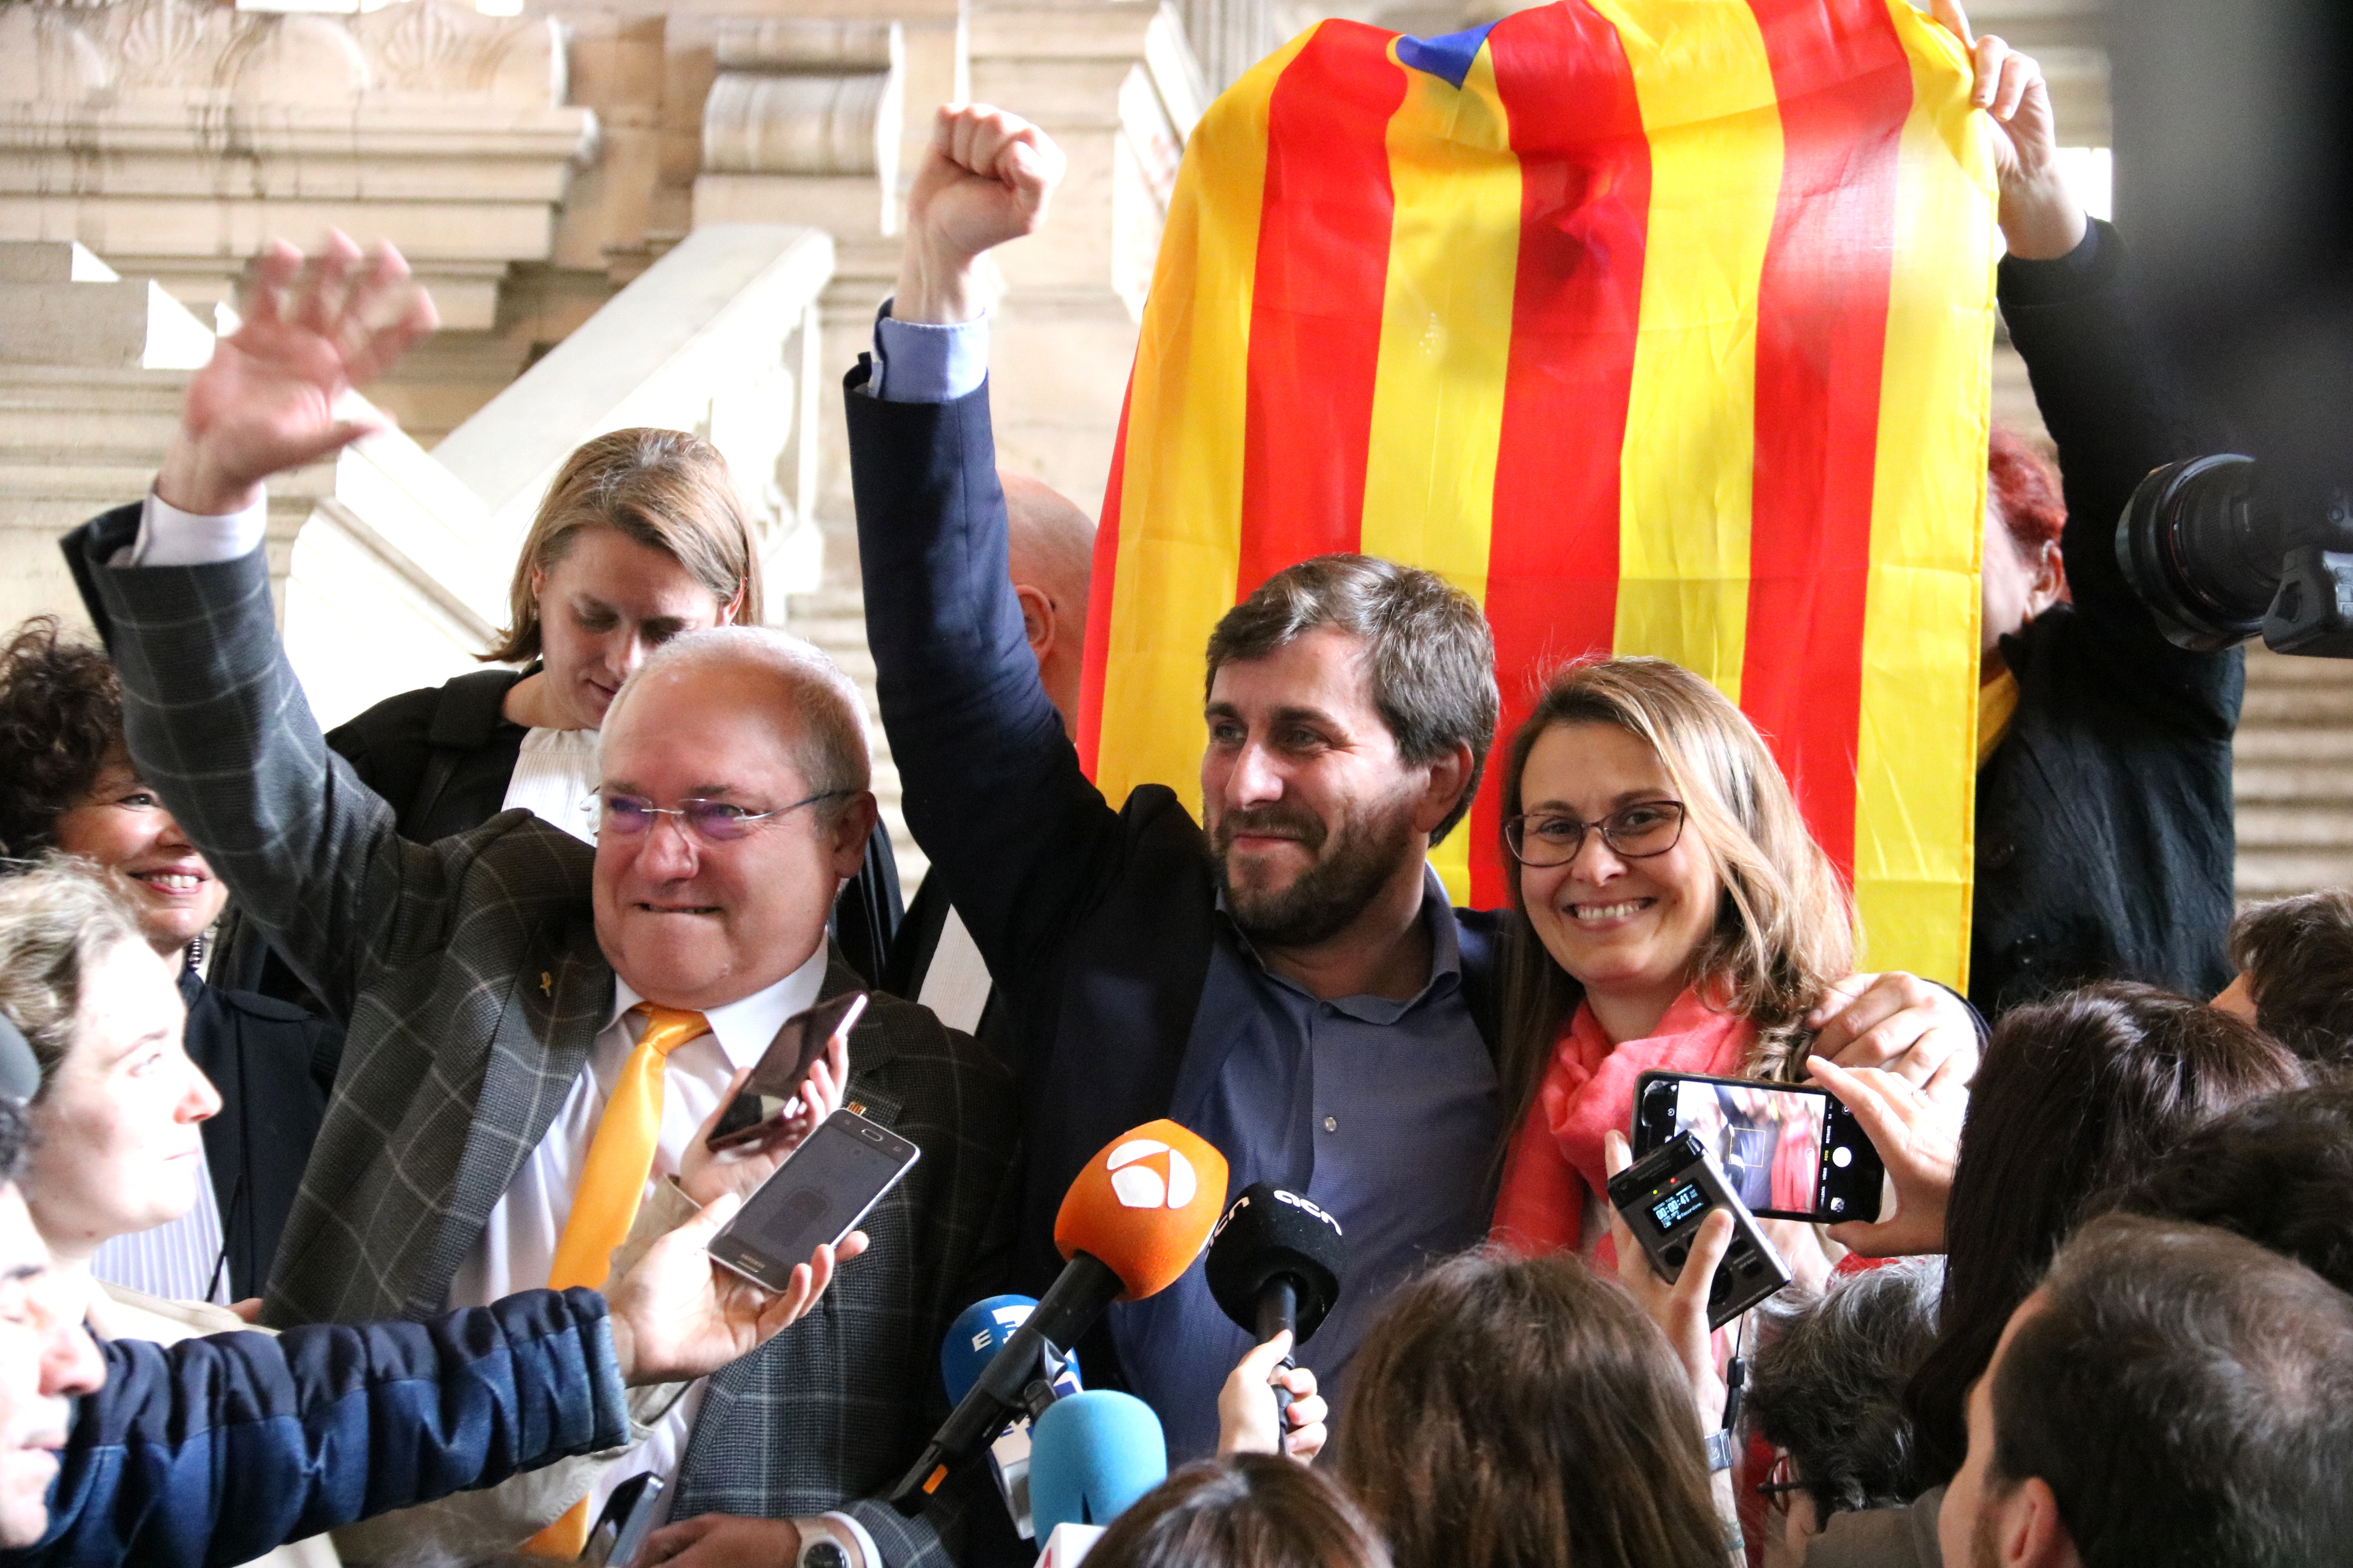 Catalan politicians Lluís Puig, Toni Comín and Meritxell Serret celebrating Belgium's decision of their extradition requests on May 16, 2018 (by Blanca Blay)